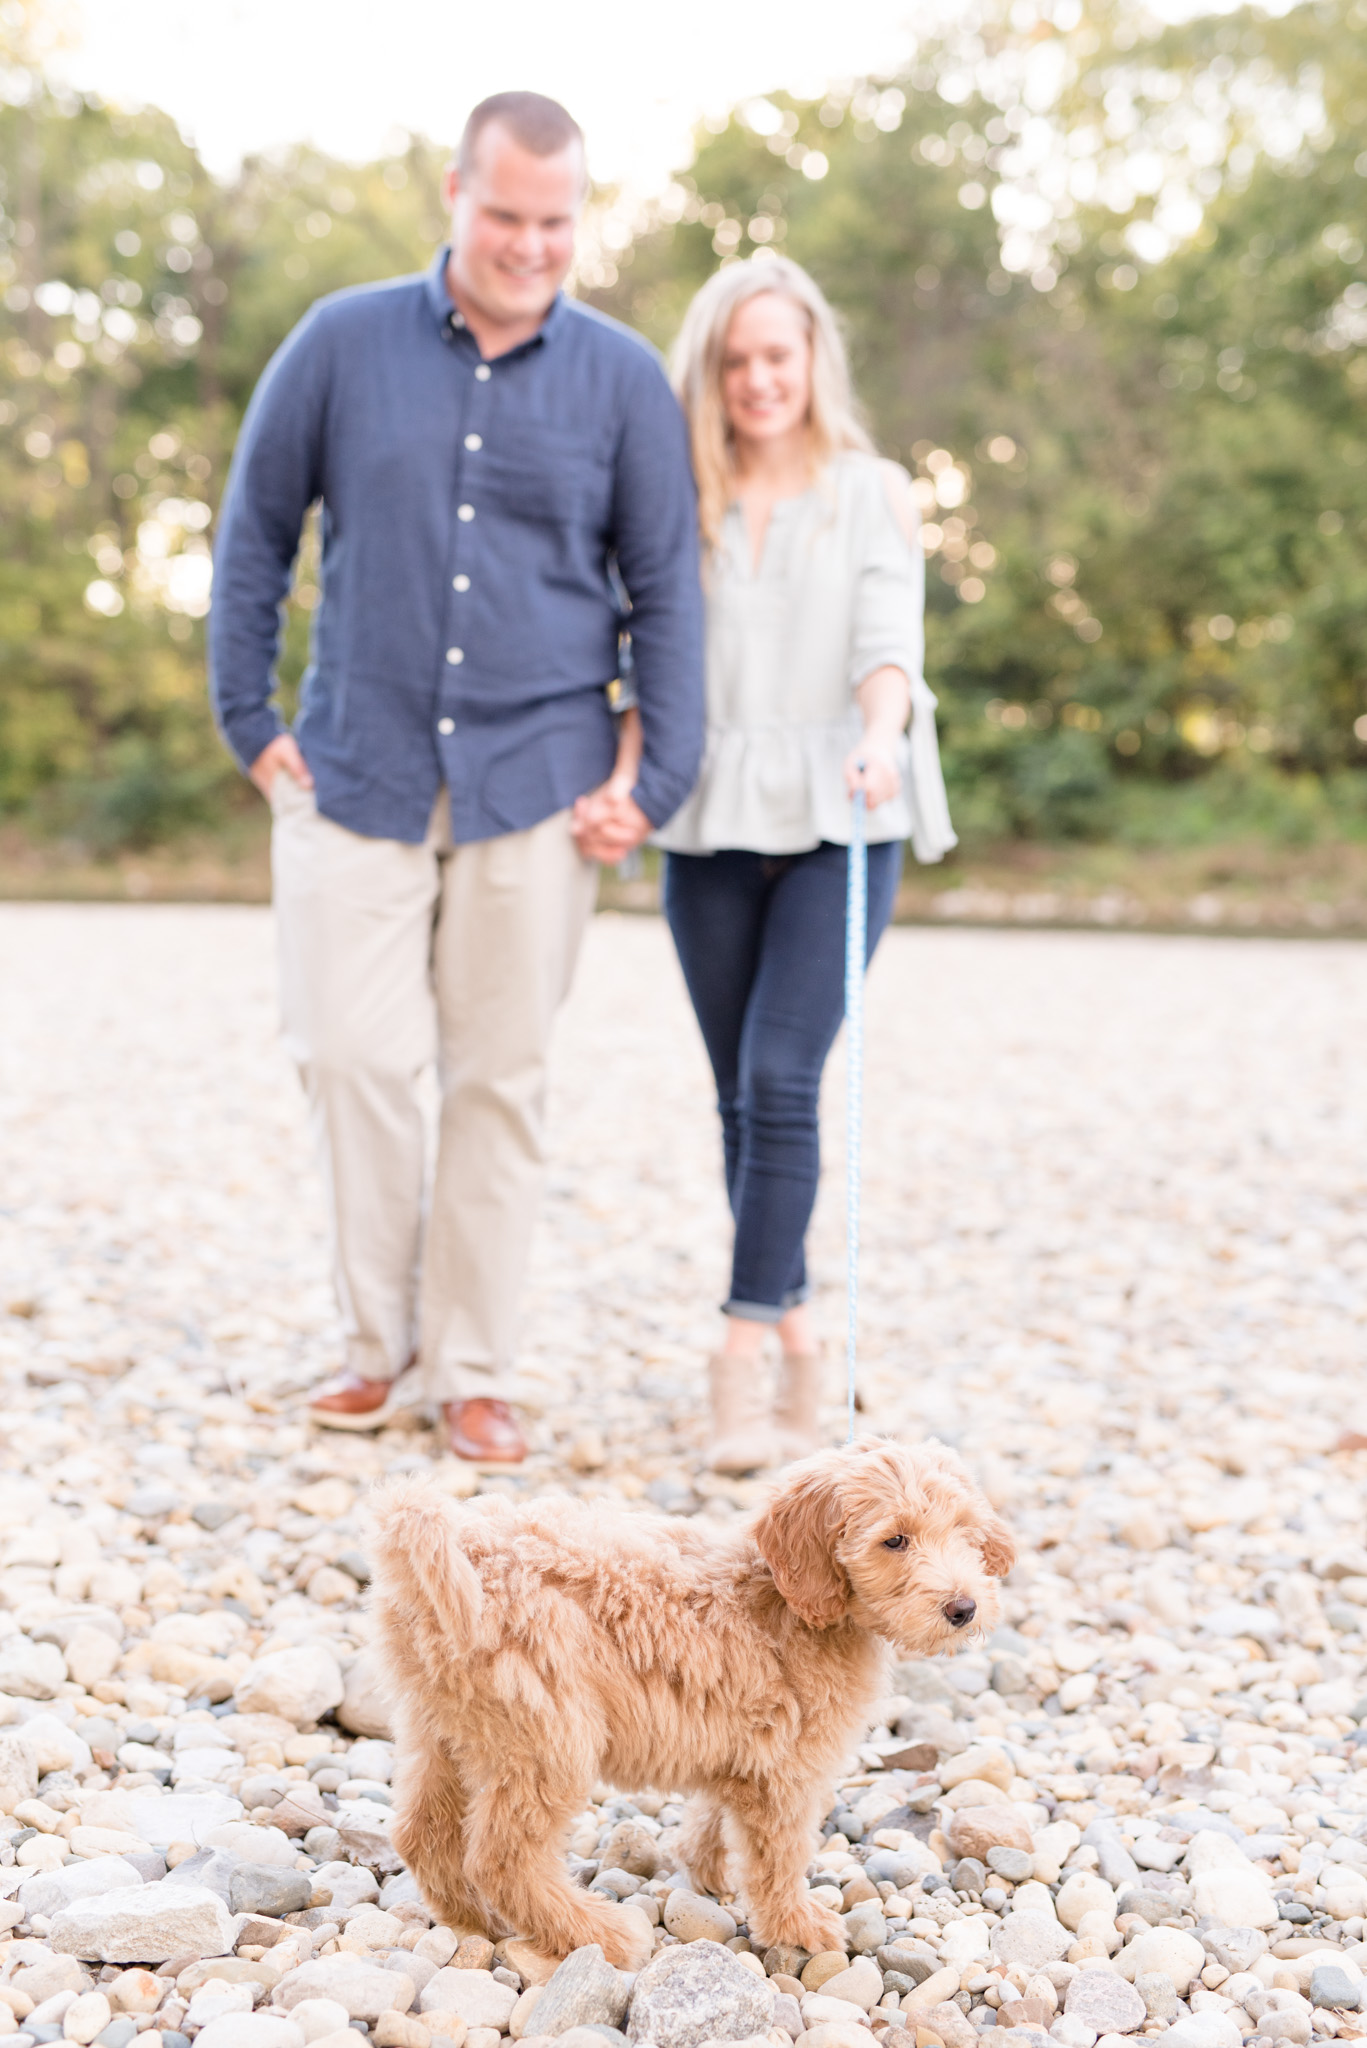 Goldendoodle puppy is walked by couple.